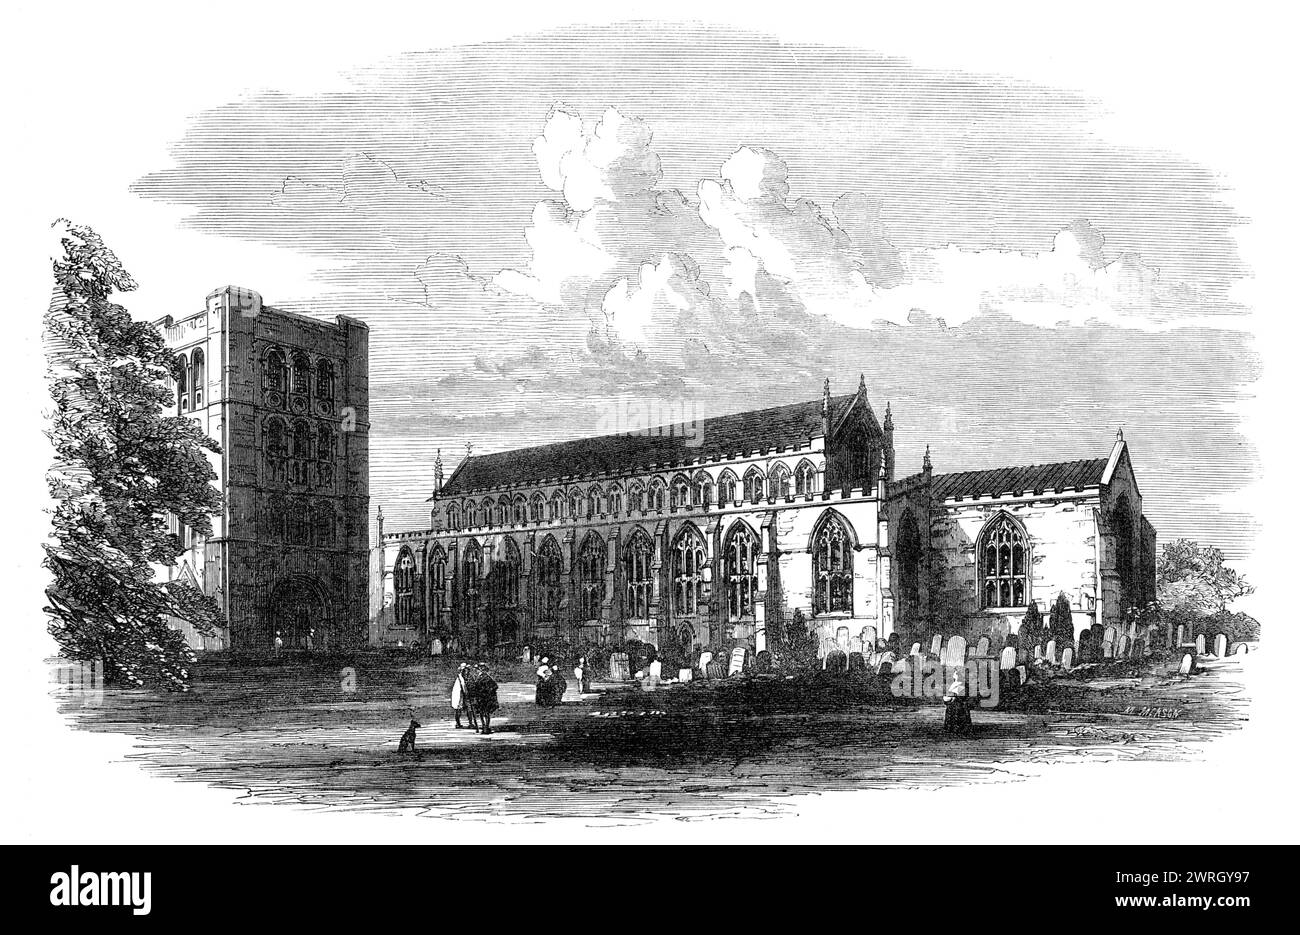 St. James's Church, Bury St. Edmunds, lately restored, 1864. Engraving from a photograph by Cundall and Downes. 'Mr. Gilbert Scott was consulted, and...[it] was decided to remove the galleries, which destroyed the beauty of the church at the west end and on the north side...The principal feature, however, of the restorations is the new and very beautiful oaken roof...The clerestory windows, six-and-thirty in number, have all been refilled with Messrs. Butler and Heaton's stained glass, and have a very beautiful appearance...As to the exterior of the church, the east and west gables have been c Stock Photo